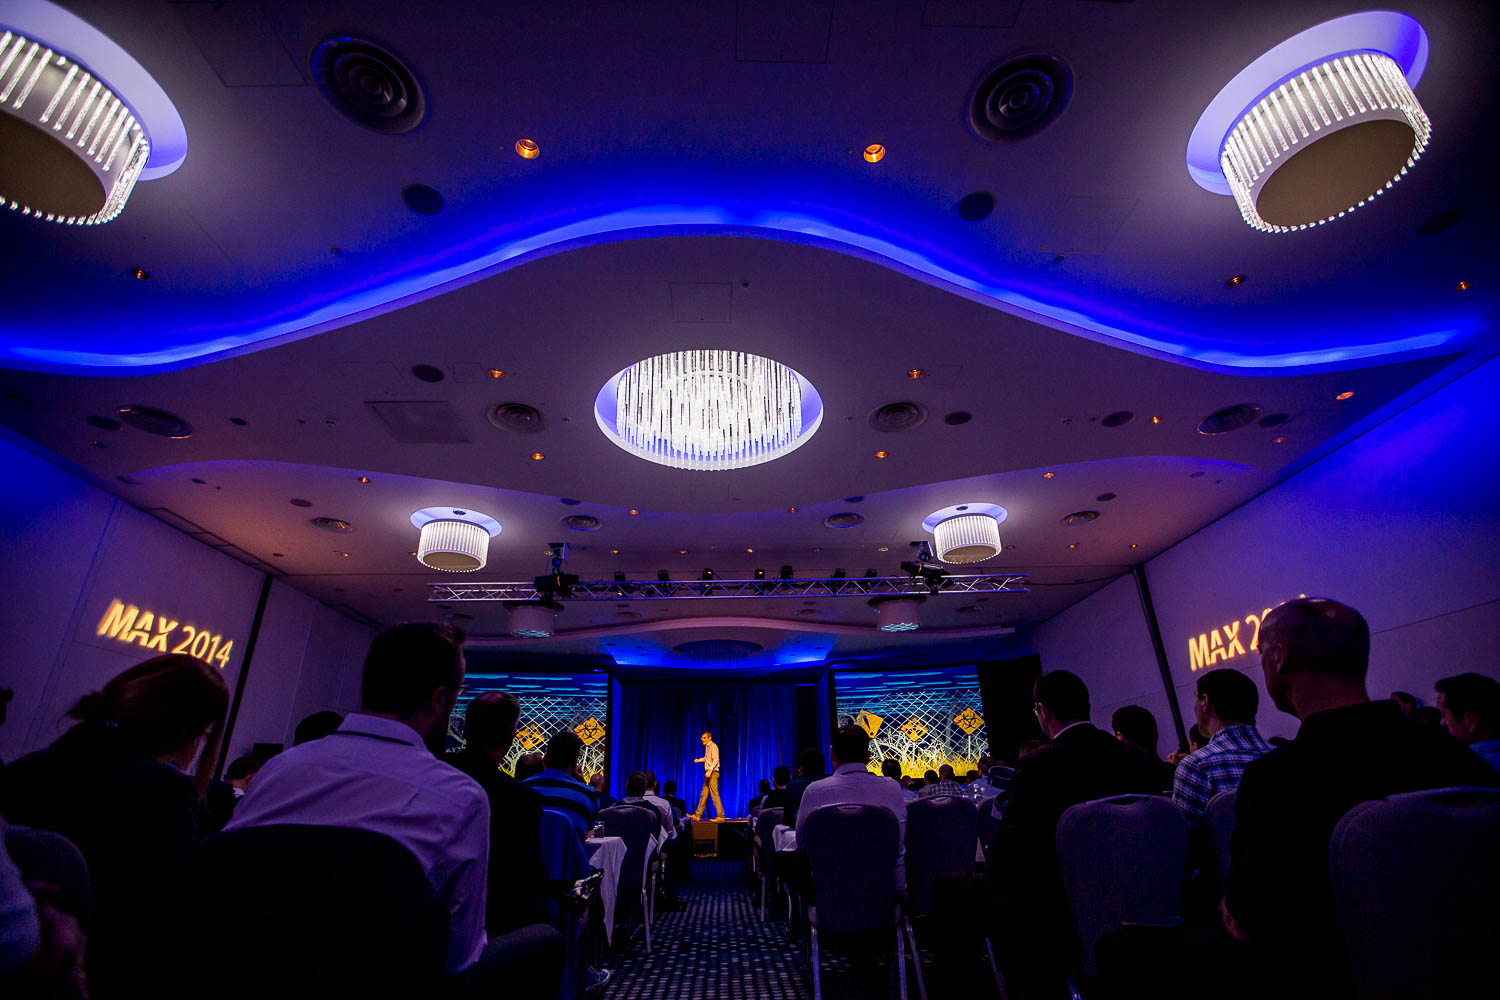 Hilton London T5 Conference Event Photography - Max Focus